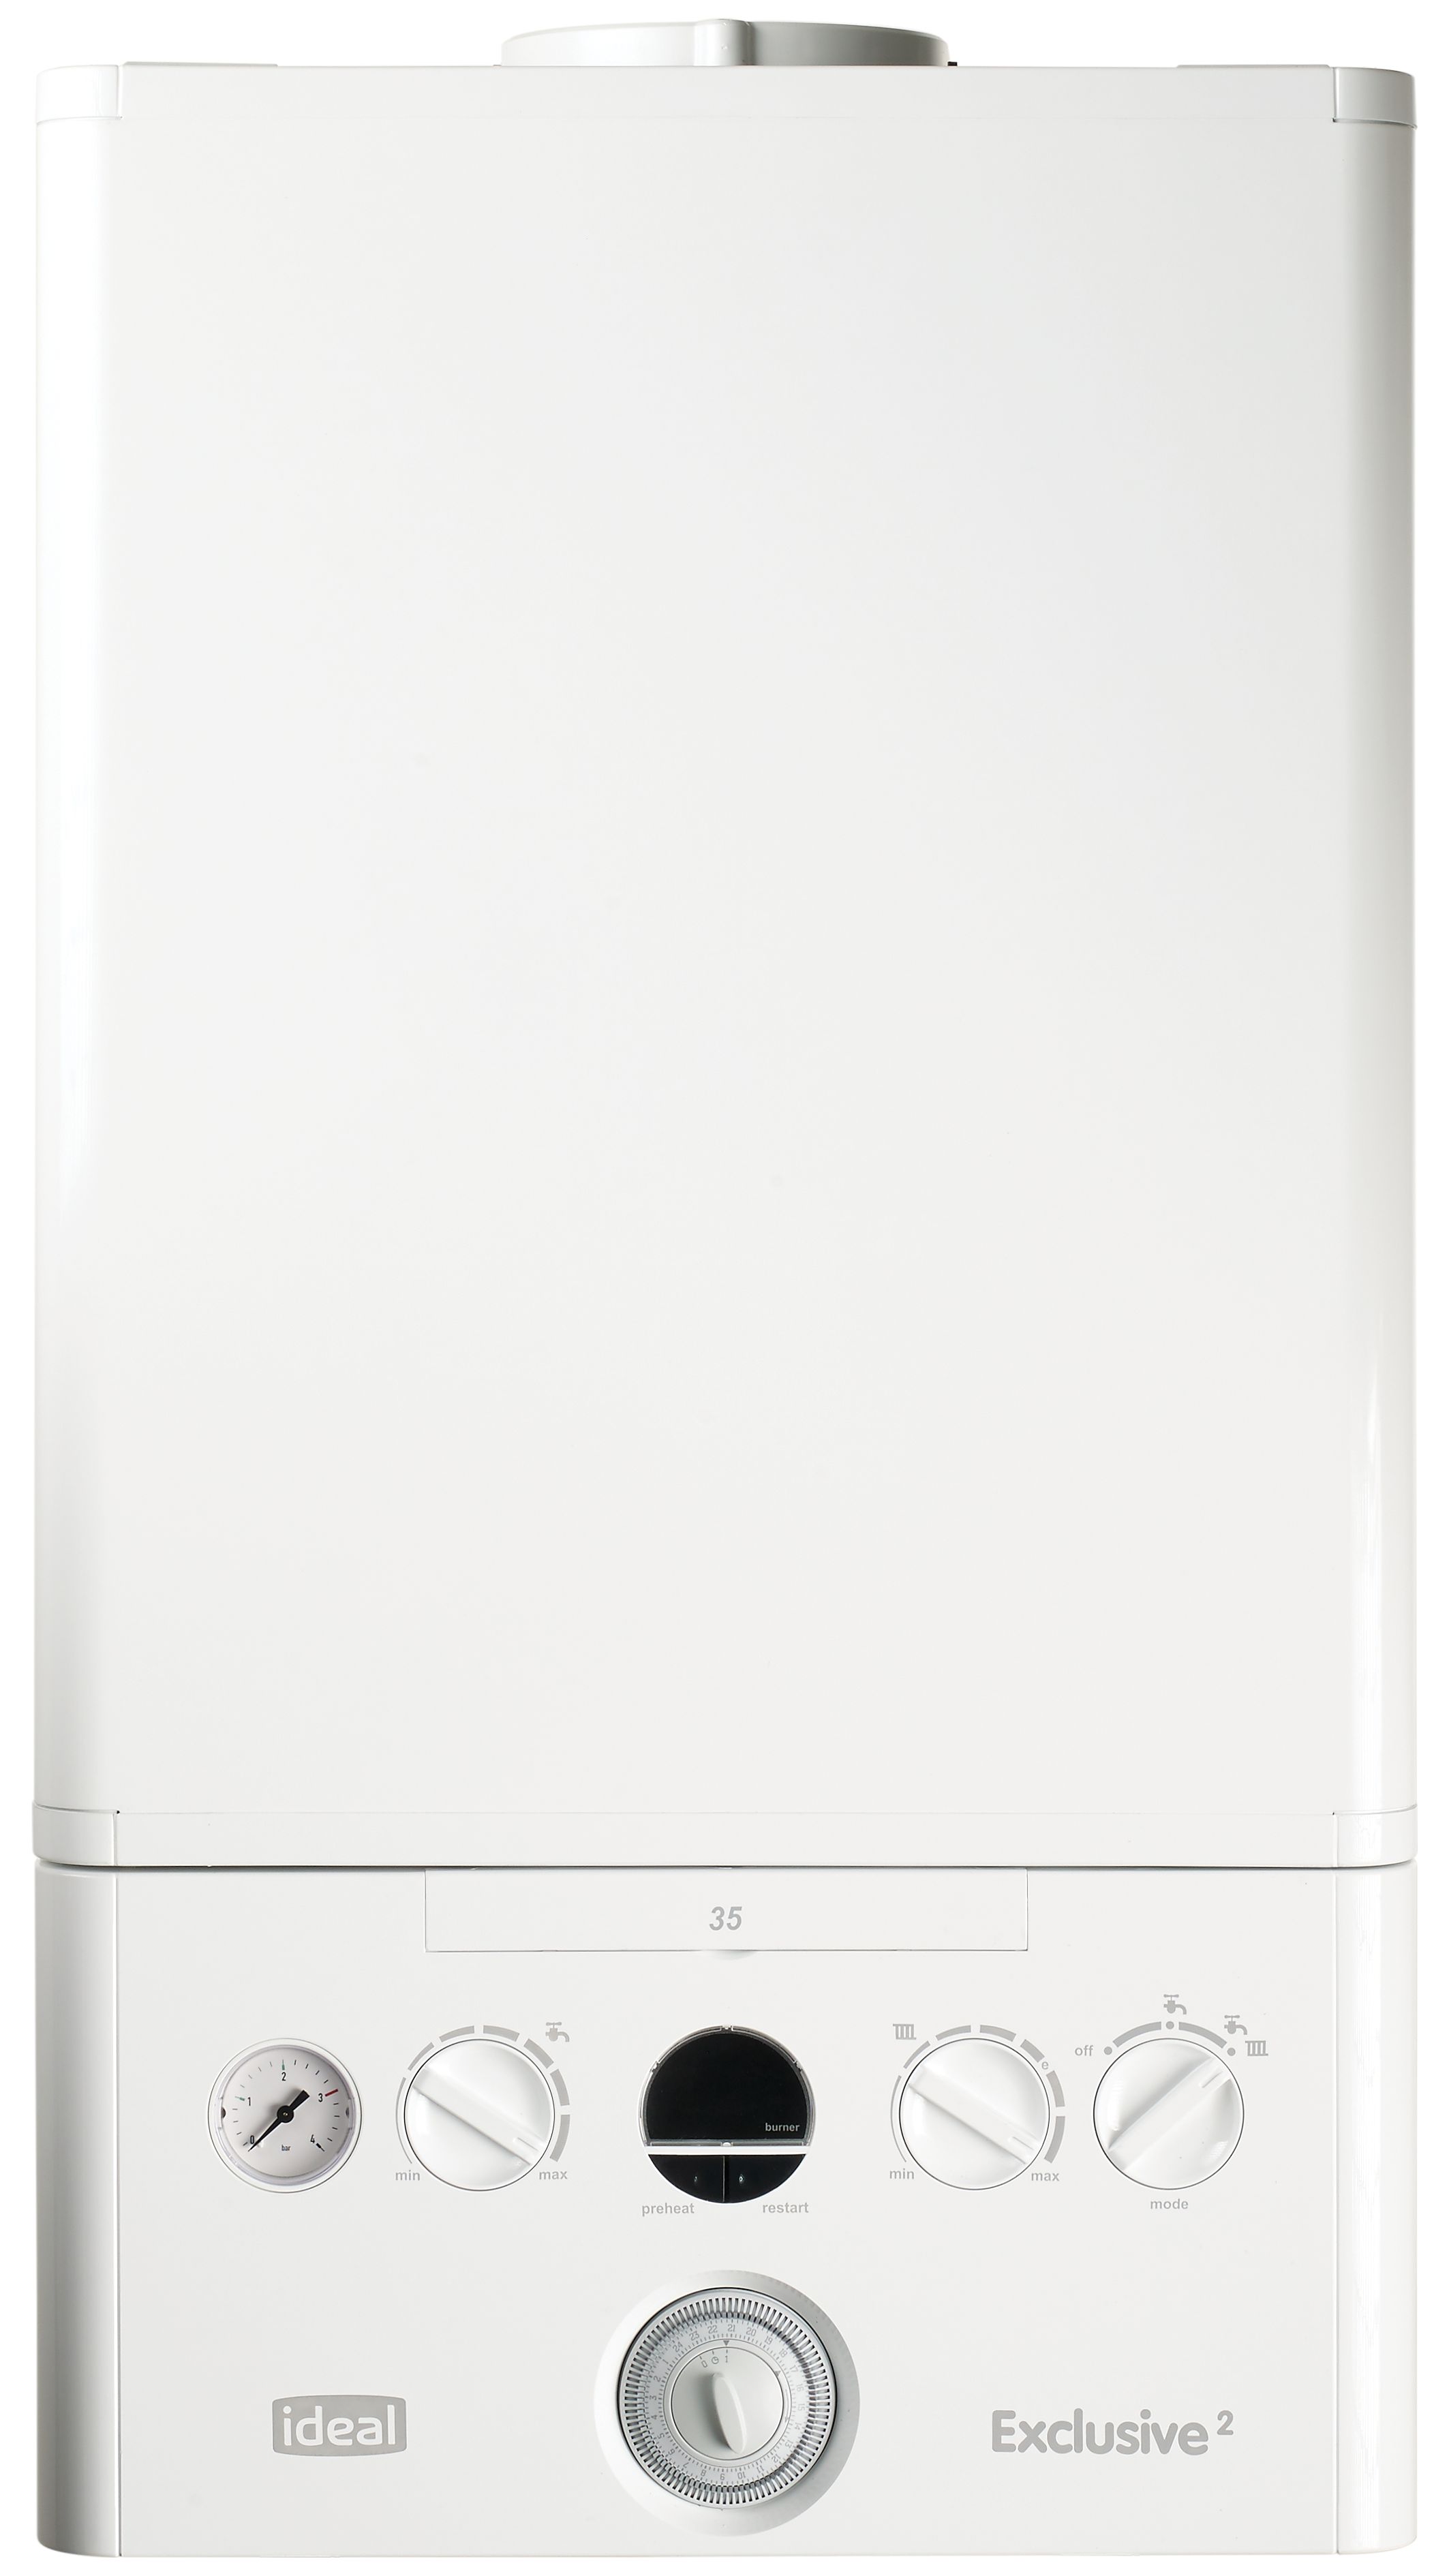 Ideal Exclusive 2 Combi Boiler Only - 30kW